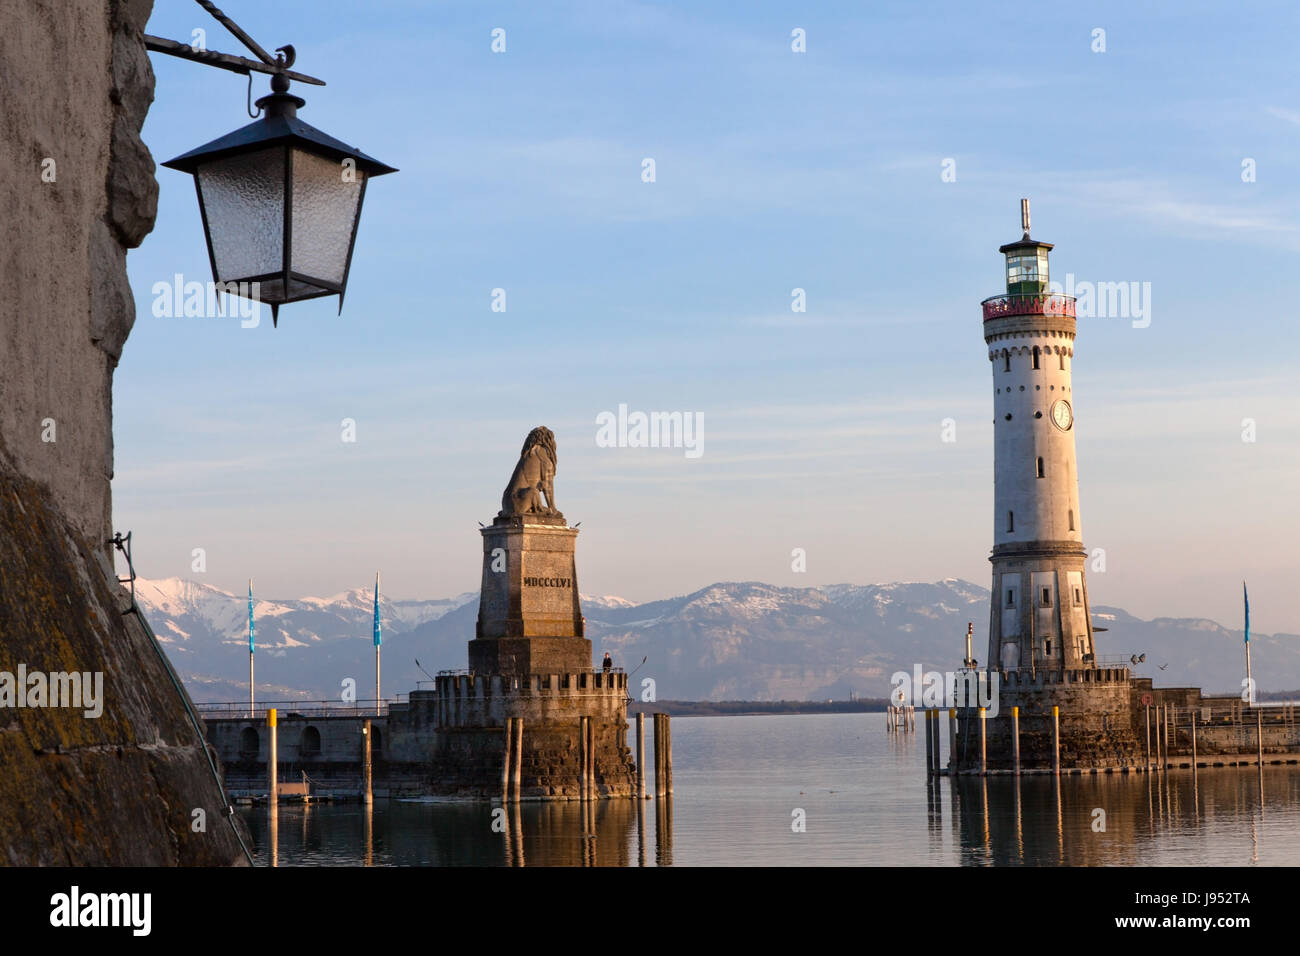 in the port of lindau at lake constance in germany Stock Photo